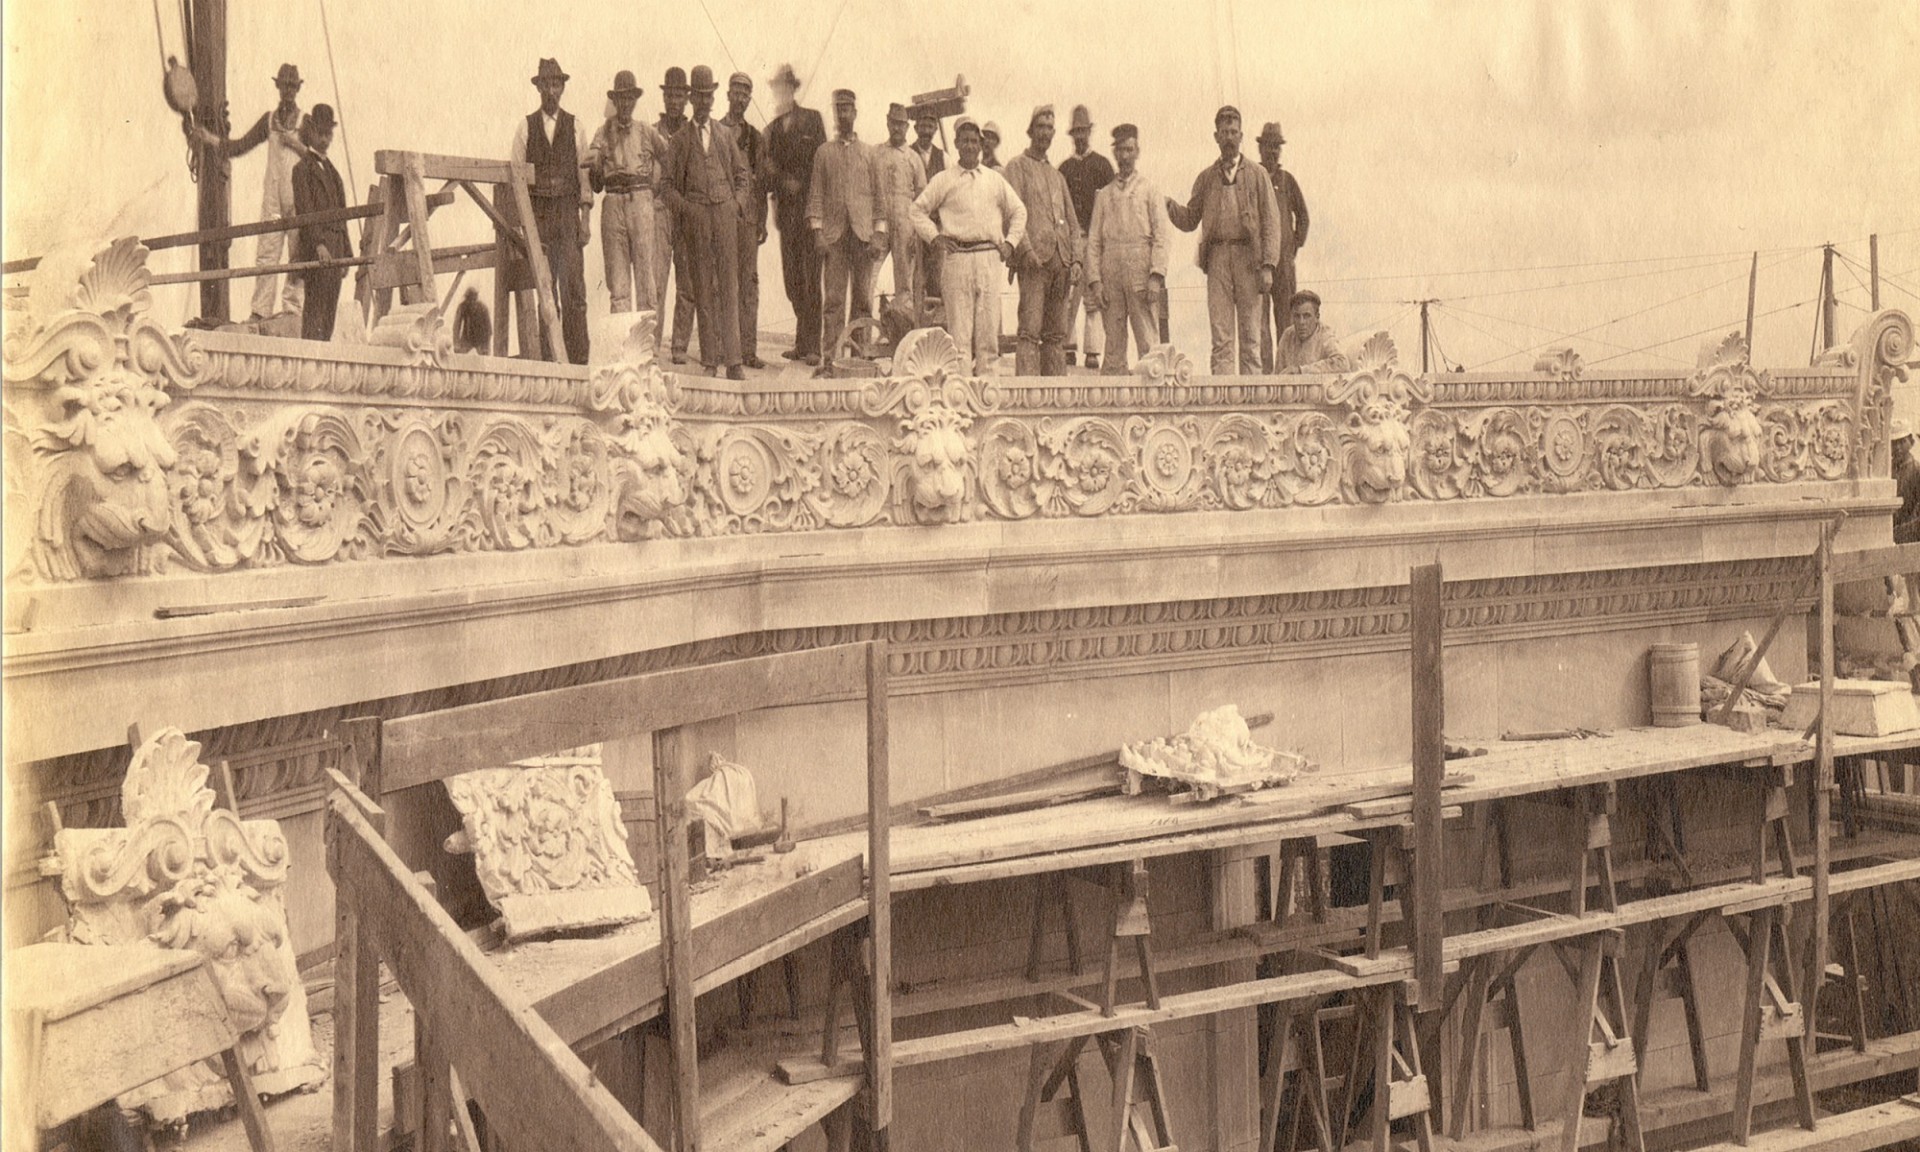 sepia toned vintage image of work men standing on an exposed portion of the under construction low library